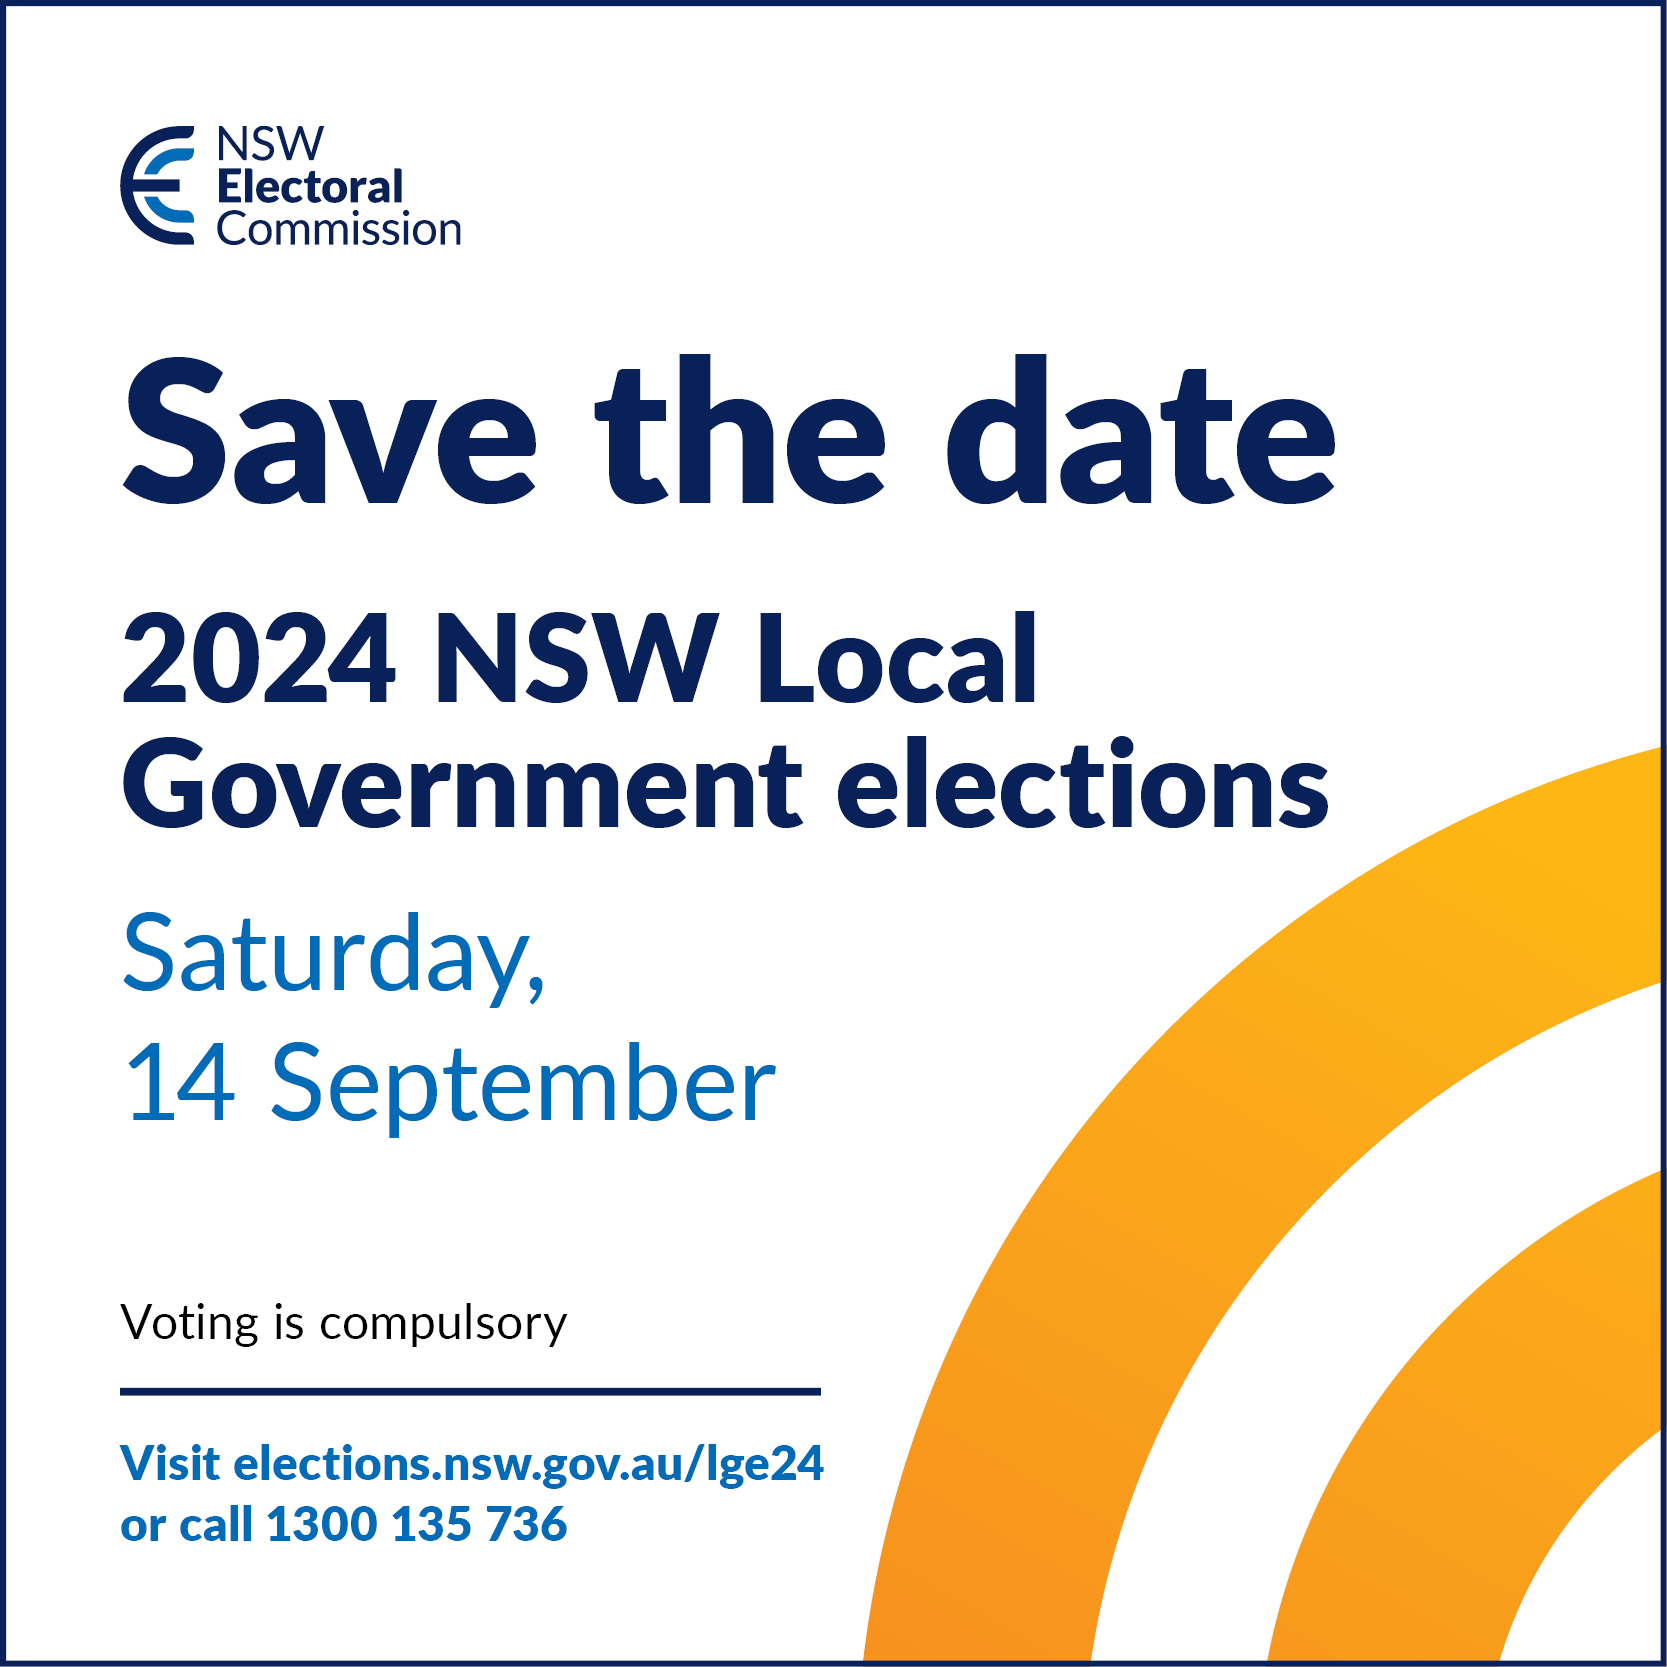 Photo with Save the date information for local elections